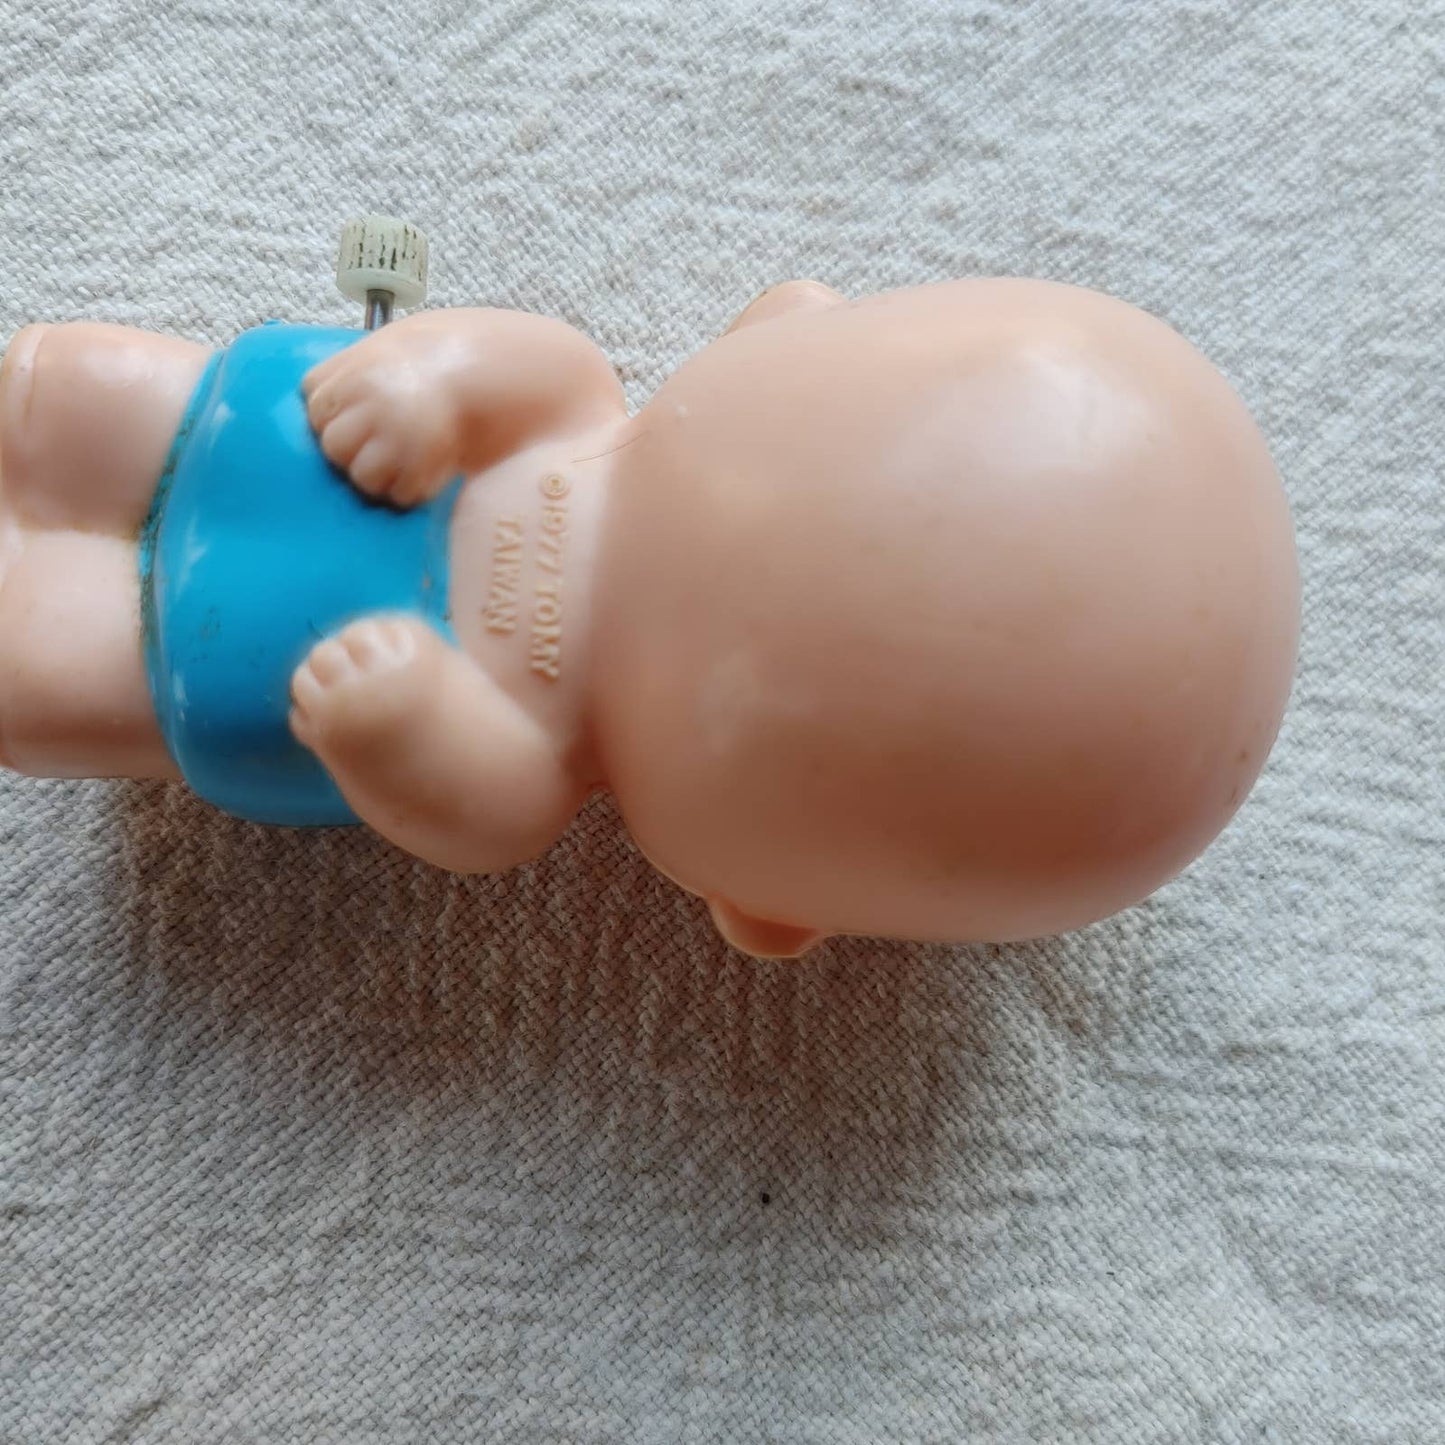 Baby Bundle! 3 Tomy wind-up toys babies 1980's retro collectible